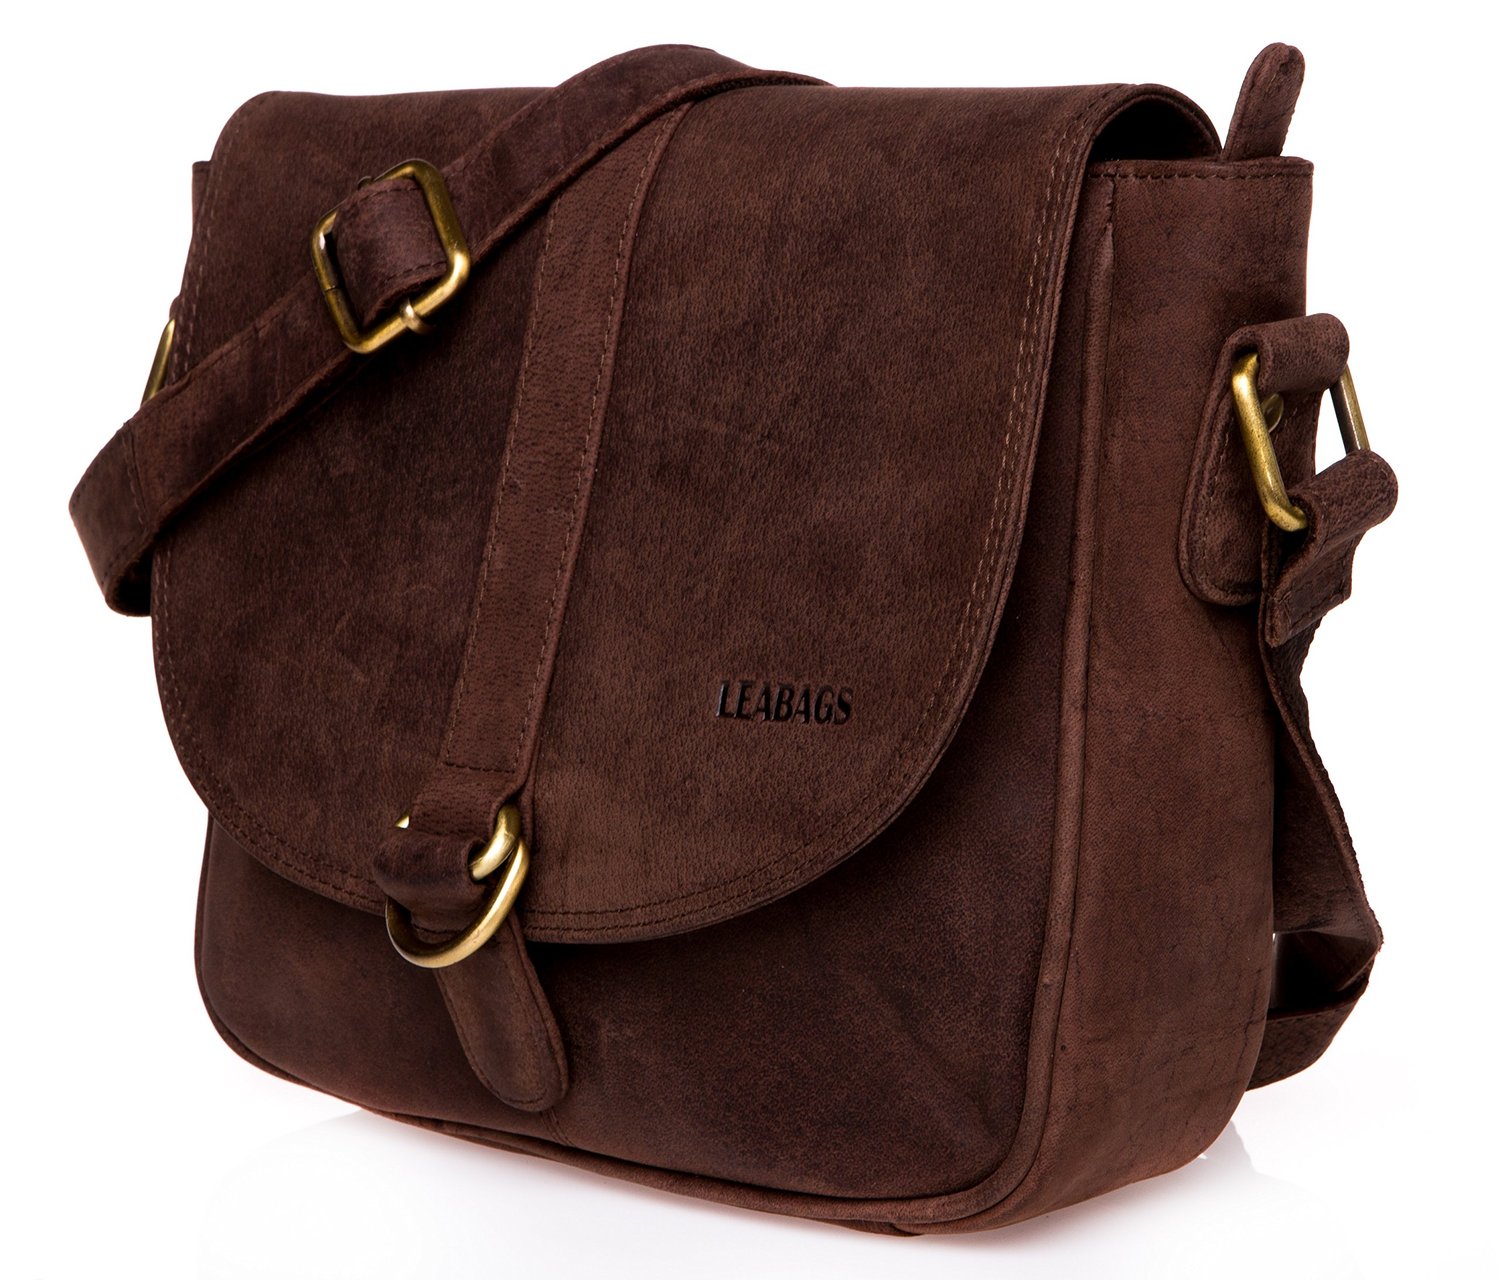 LEABAGS - 